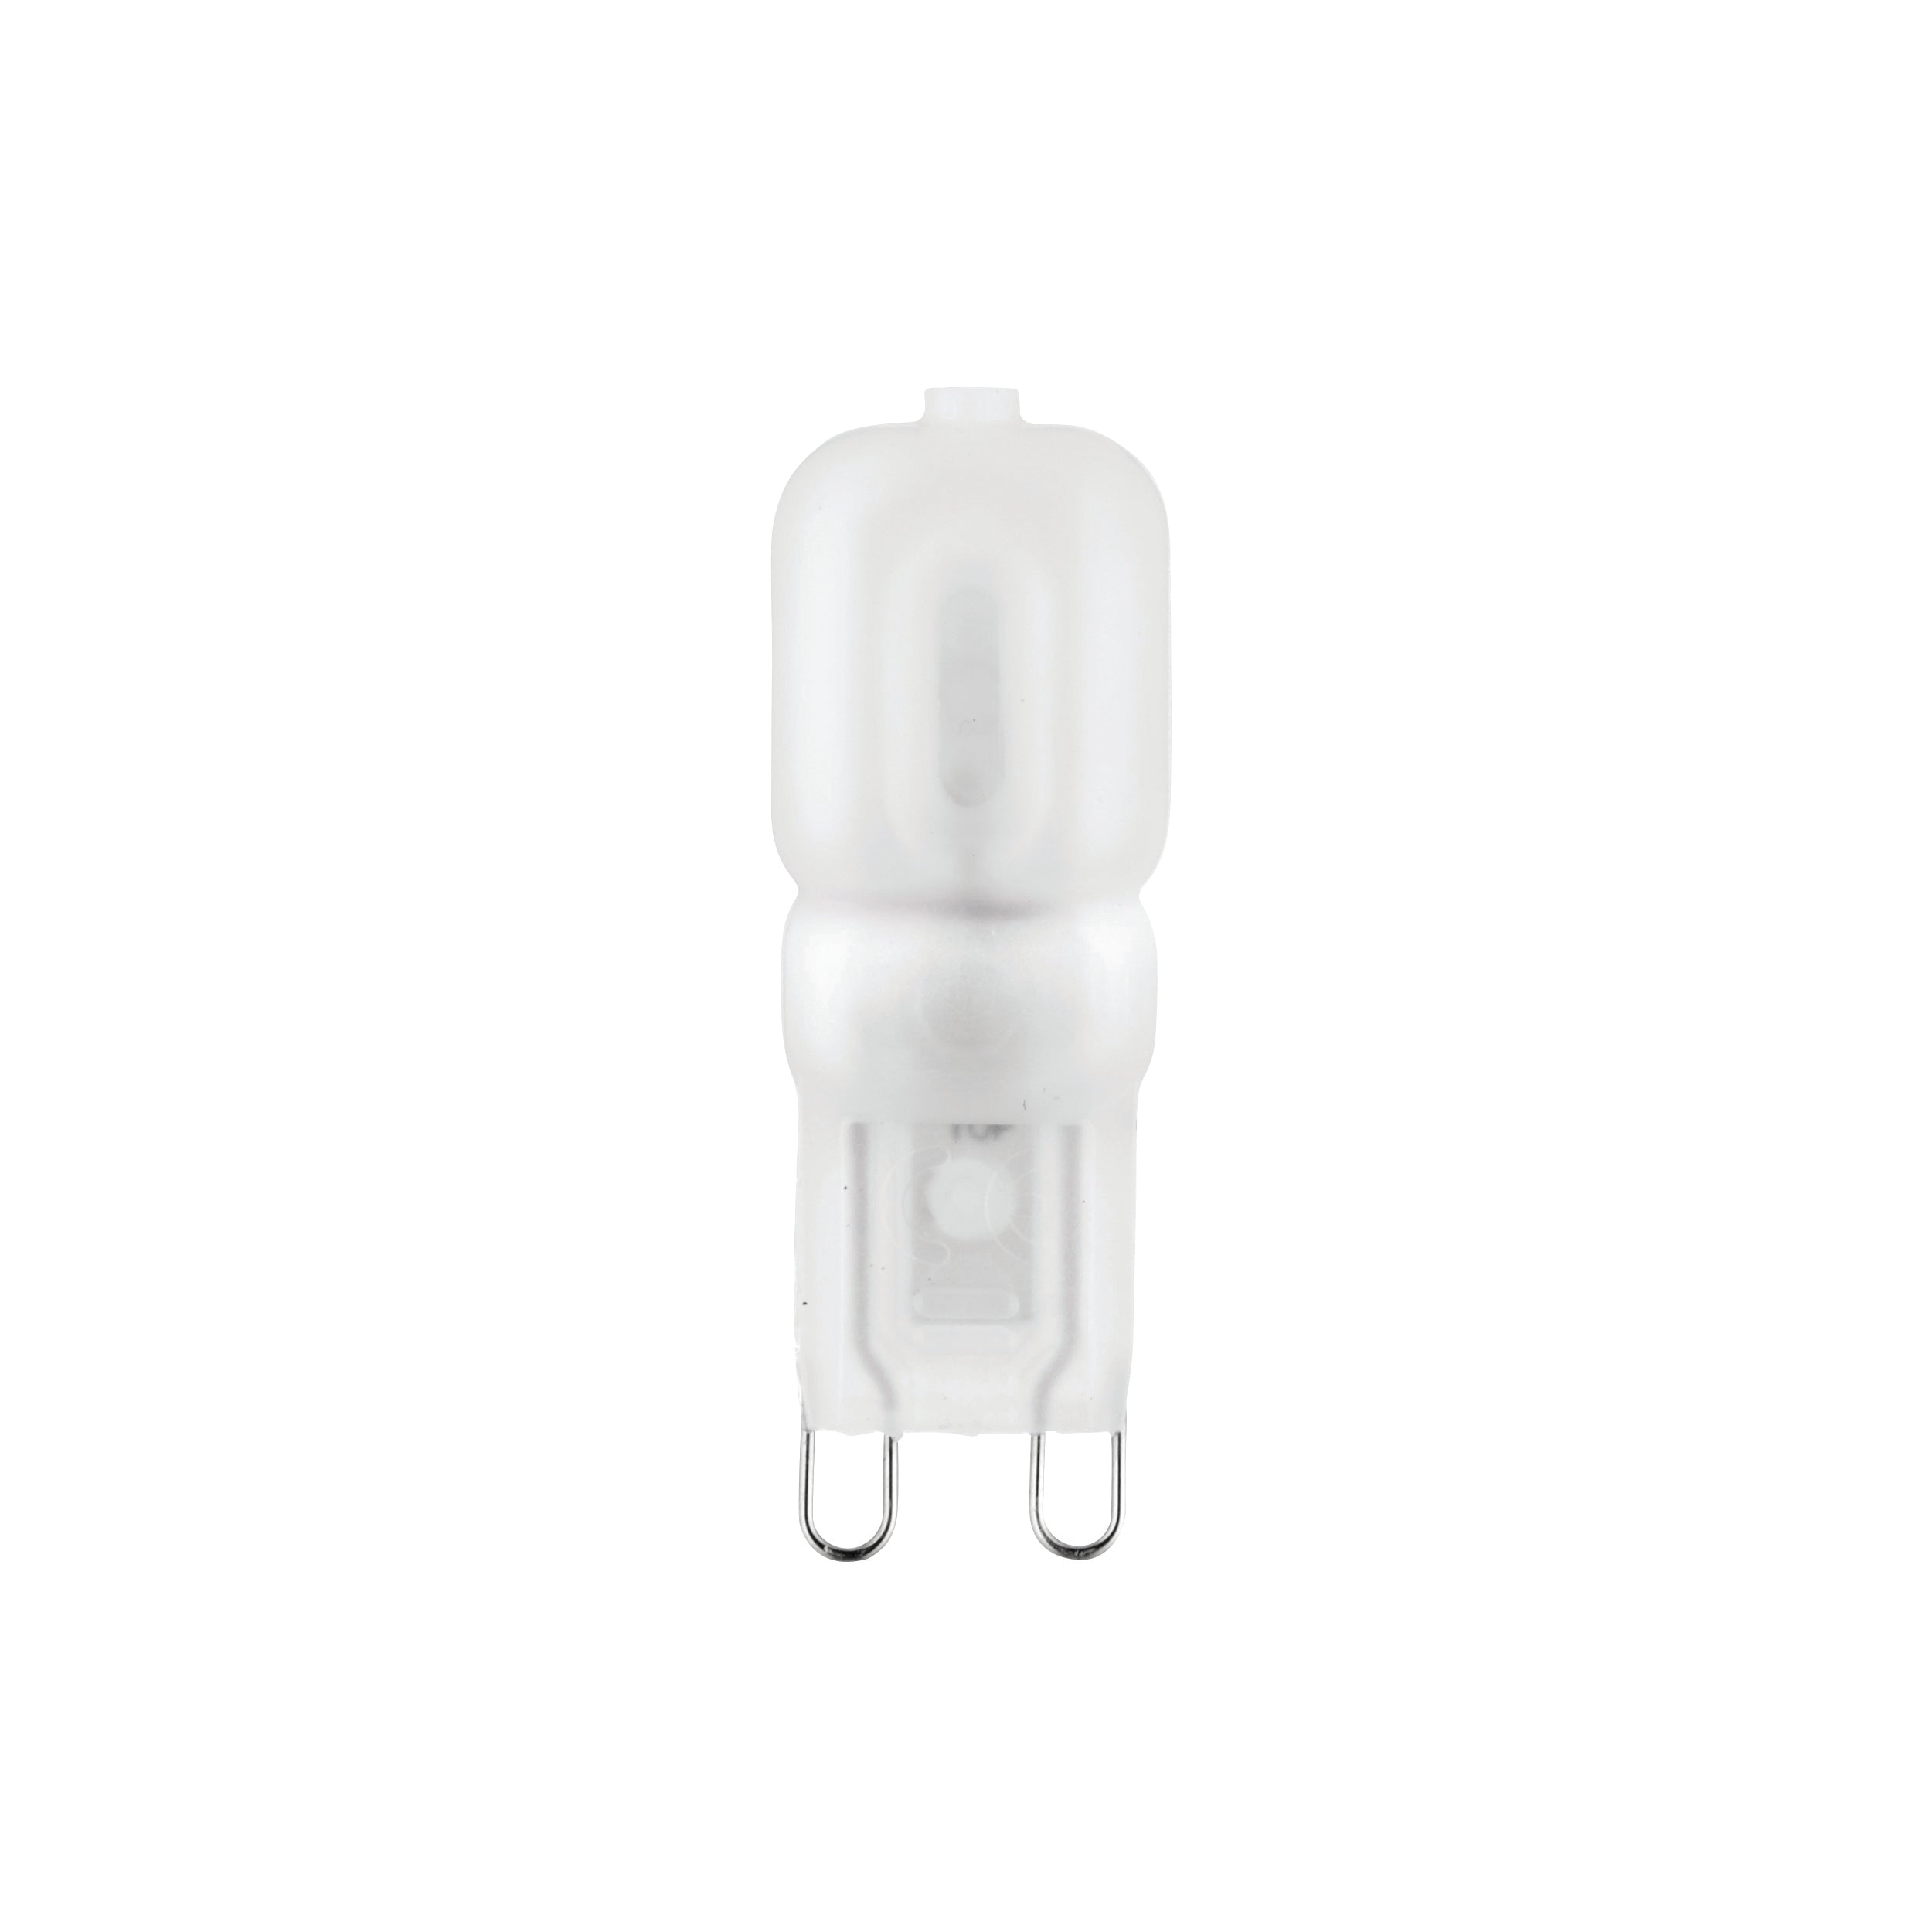 G9 LED bulb capsule. Cool White 4000K 2W 200lm. Non-Dimmable